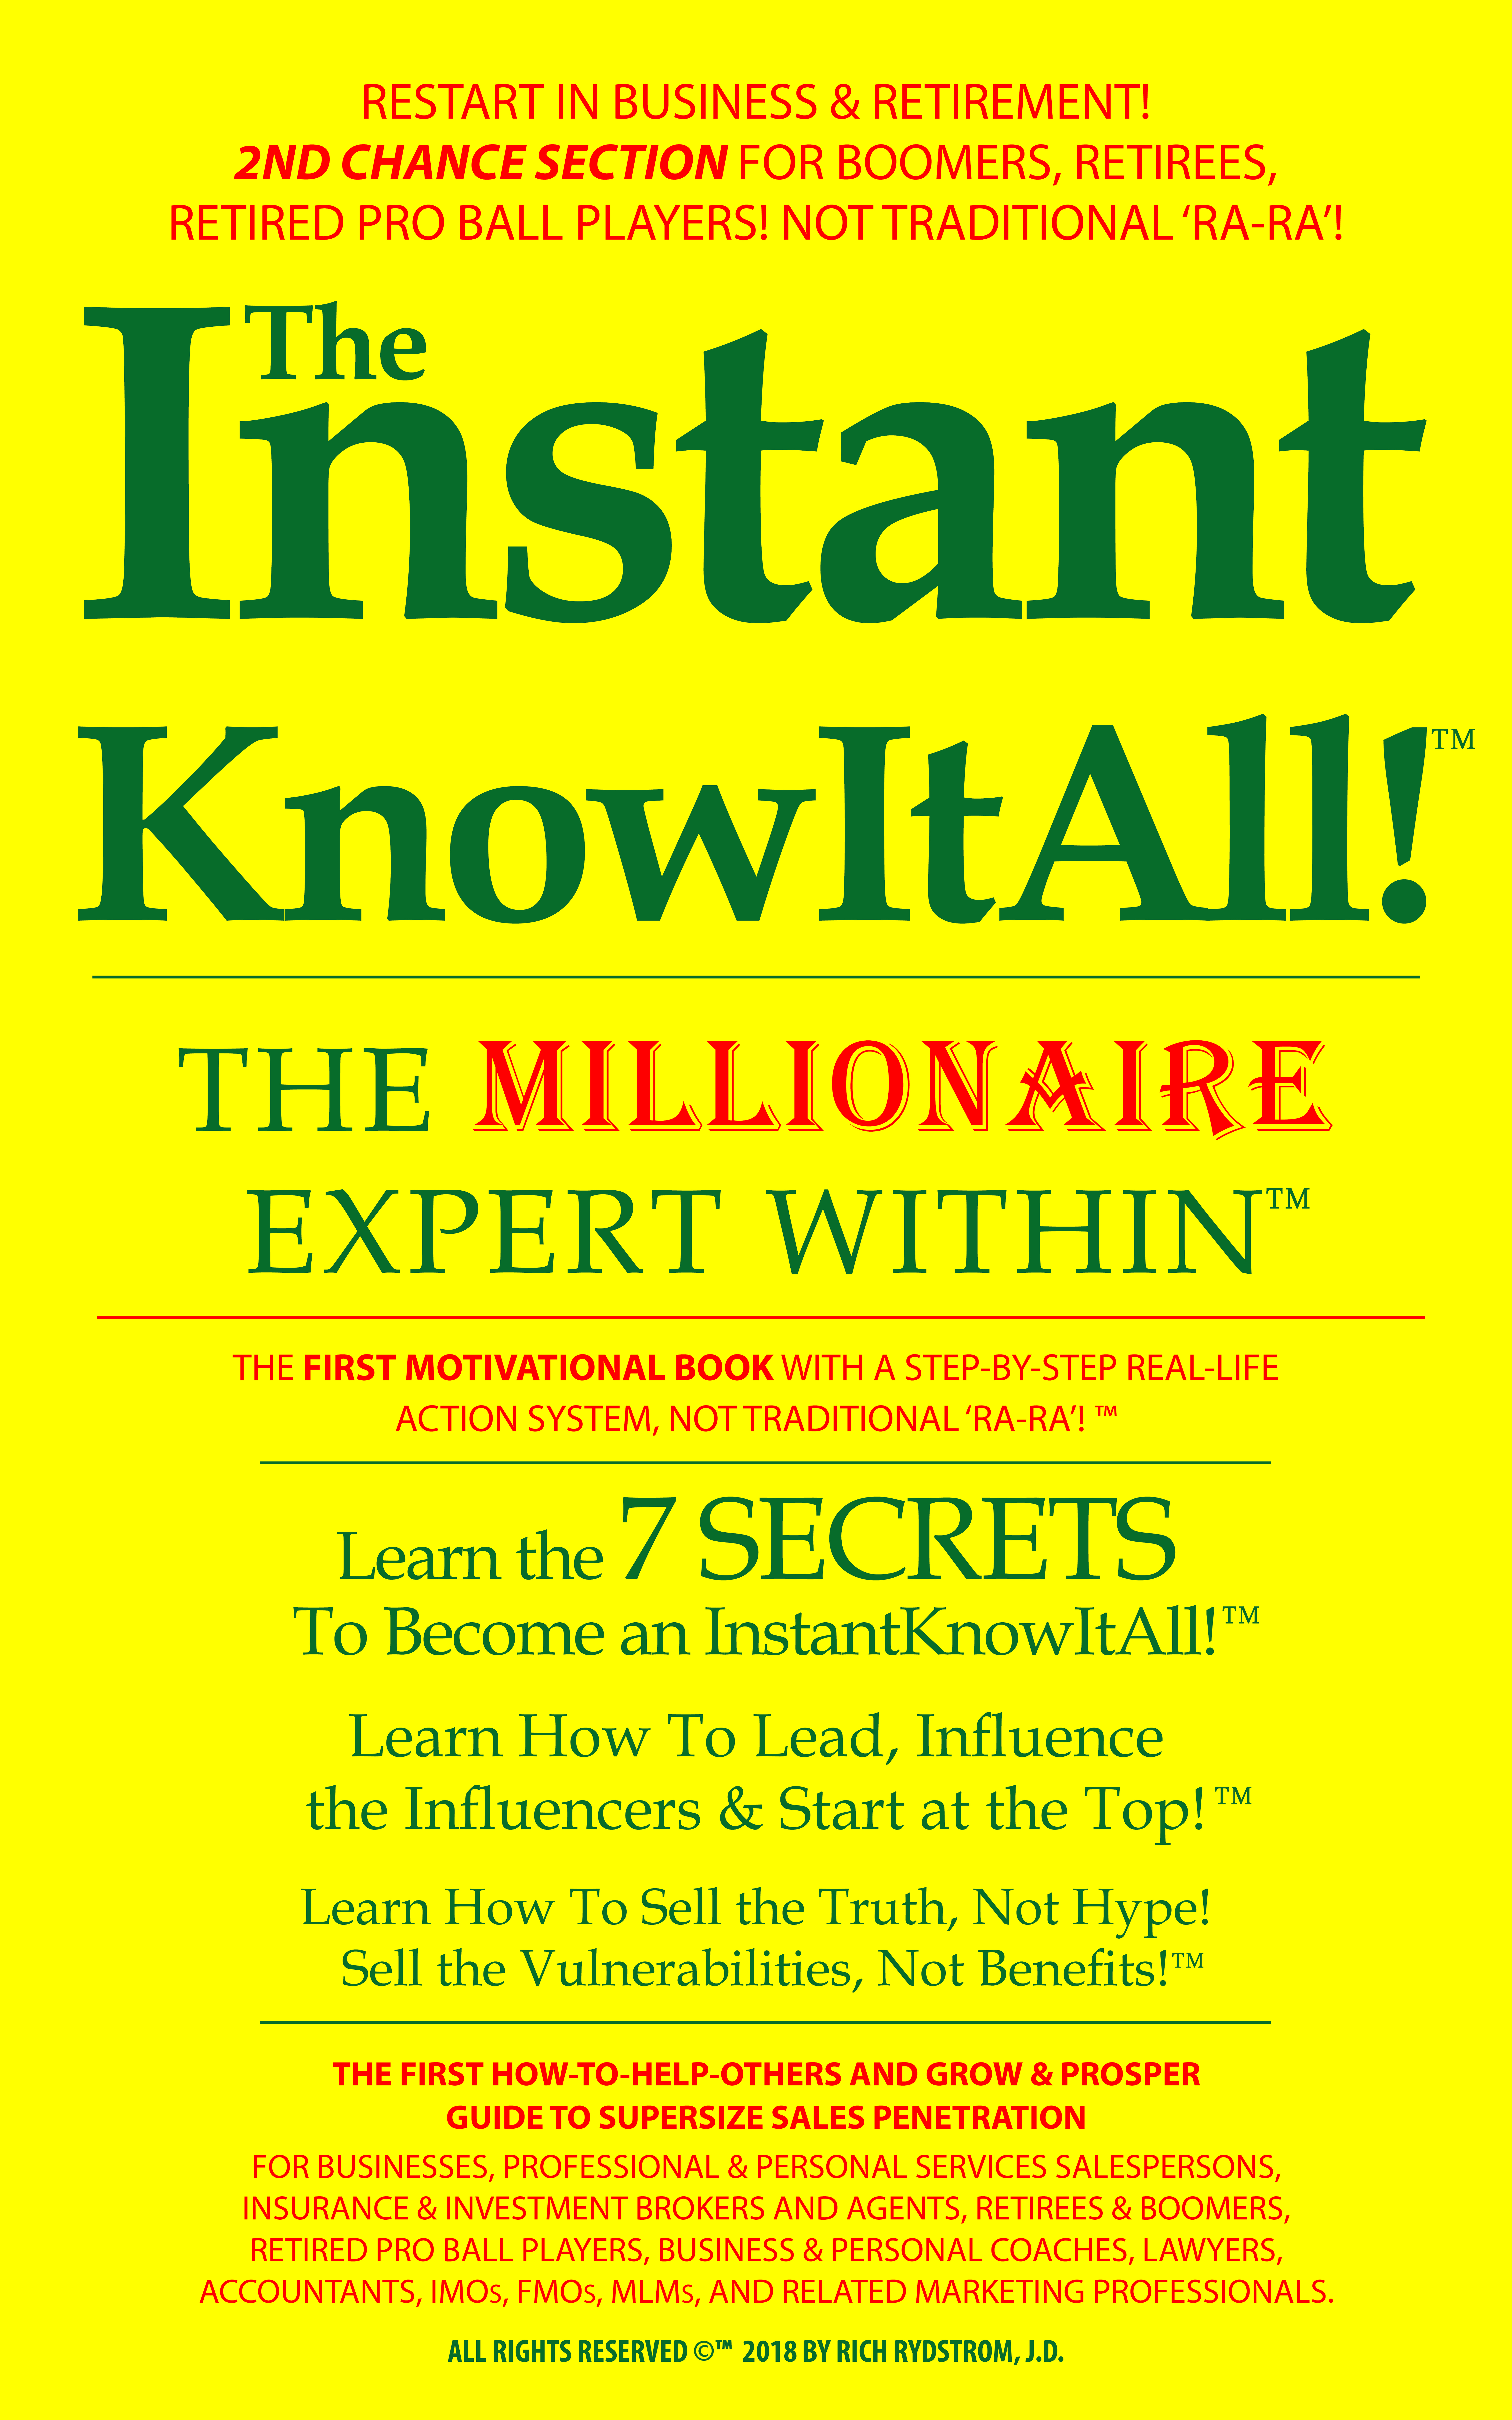 Book, Best Seller, New Category, How-To, Motivational, Boomers, Retirees, How-To-Help-Others, New Start, Former Pro Ball Players, Internet Marketing, Influencer Marketing, Newtork Marketing, MLM, Affilaite, Book Sales, Buy Book, Trump Tax,  Content Creators, Salespersons, Life Insurance, Personal Coaches, Business Coaches, Professional Services, Attorney, CPA, IMO, FMO, Lead, Influence, Start at Top, Sales, Selling Motivation